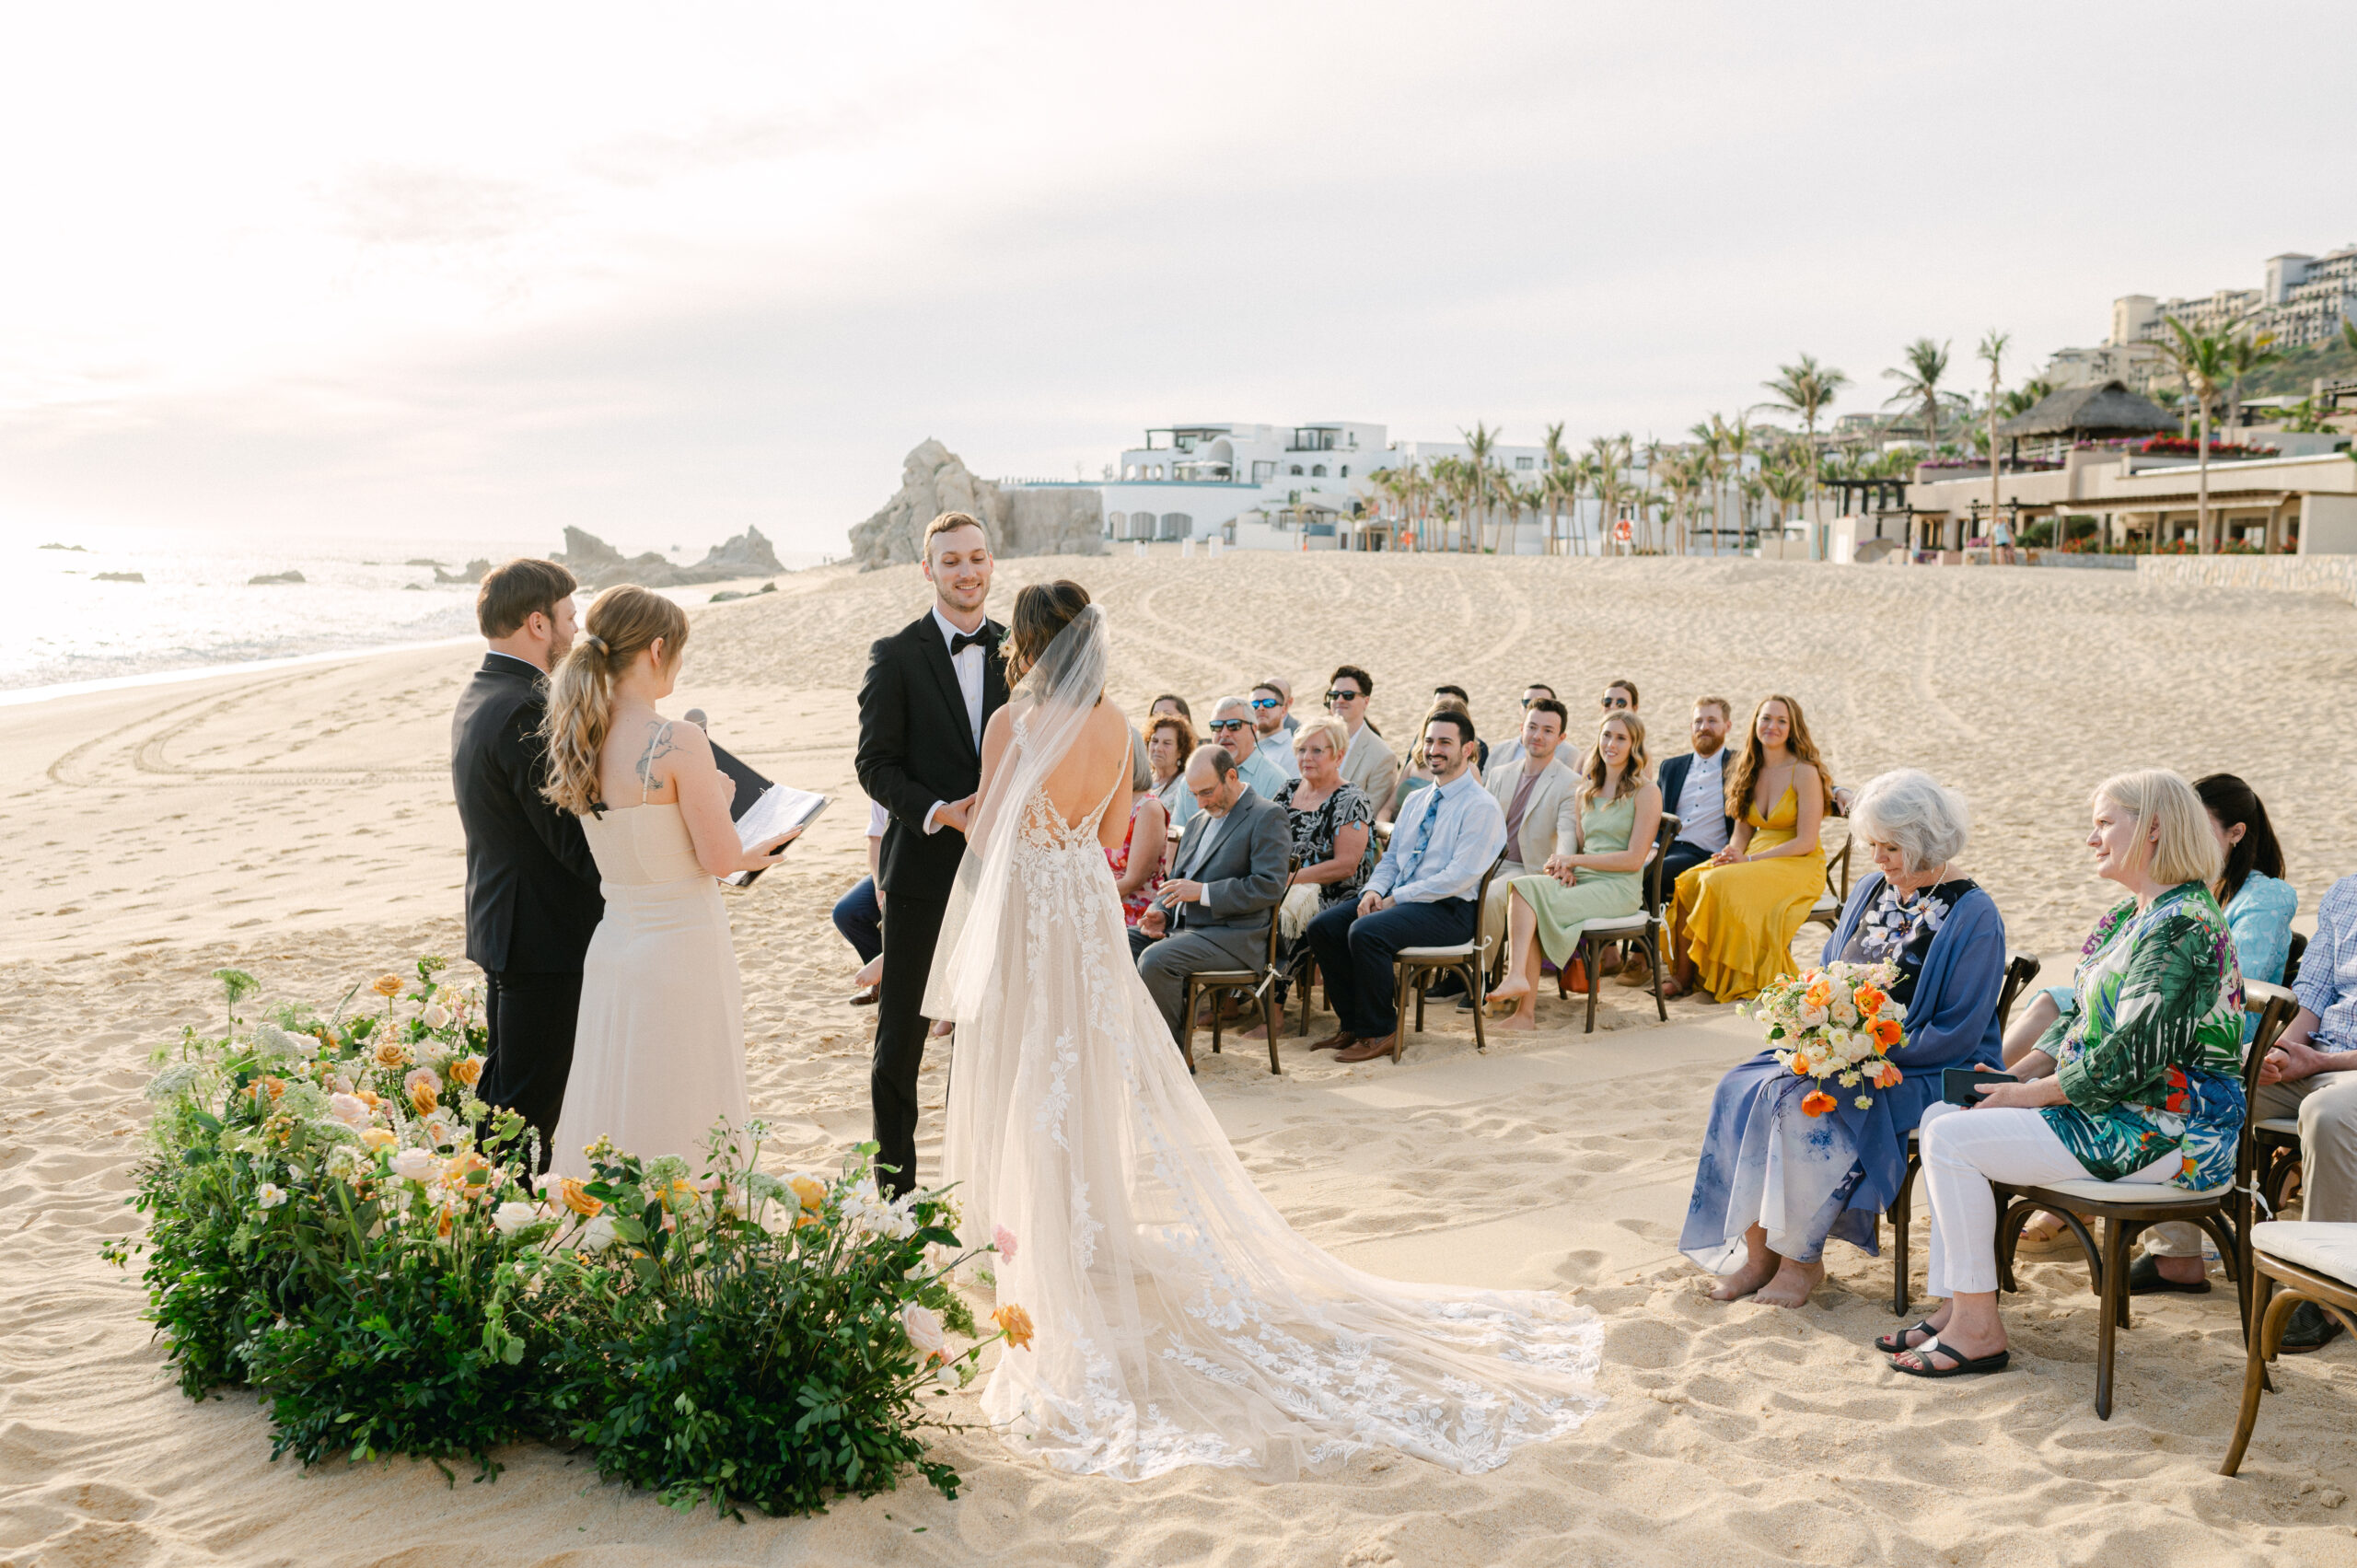 Intimate beach wedding ceremony in Pedregal, Cabo San Lucas with a grounded floral arch. 